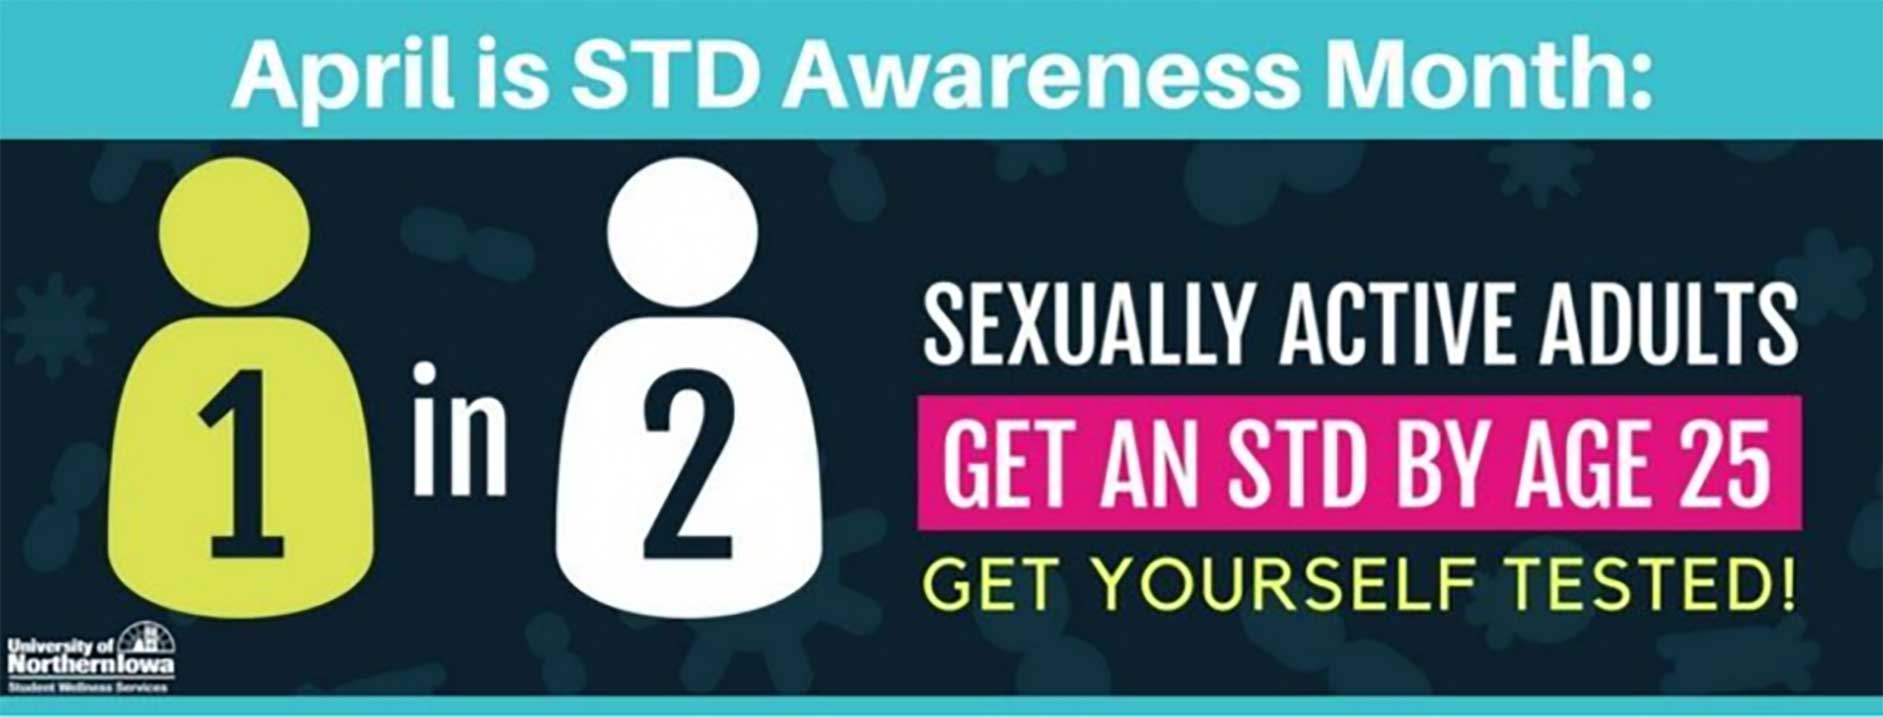 1 in 2 sexually active adults get an std by age 25.